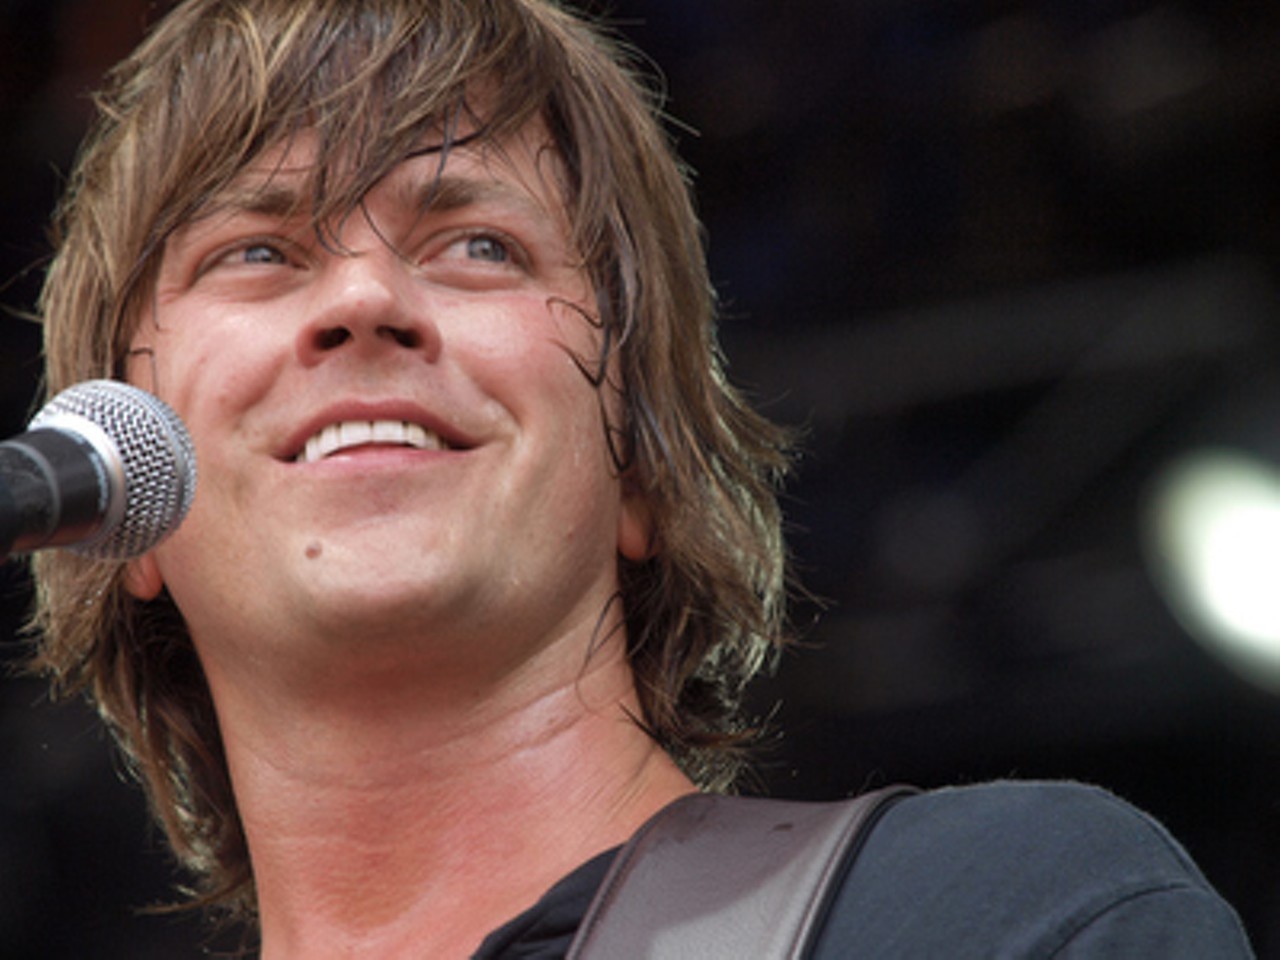 Rhett Miller of the Old 97's performs Friday at ACL.